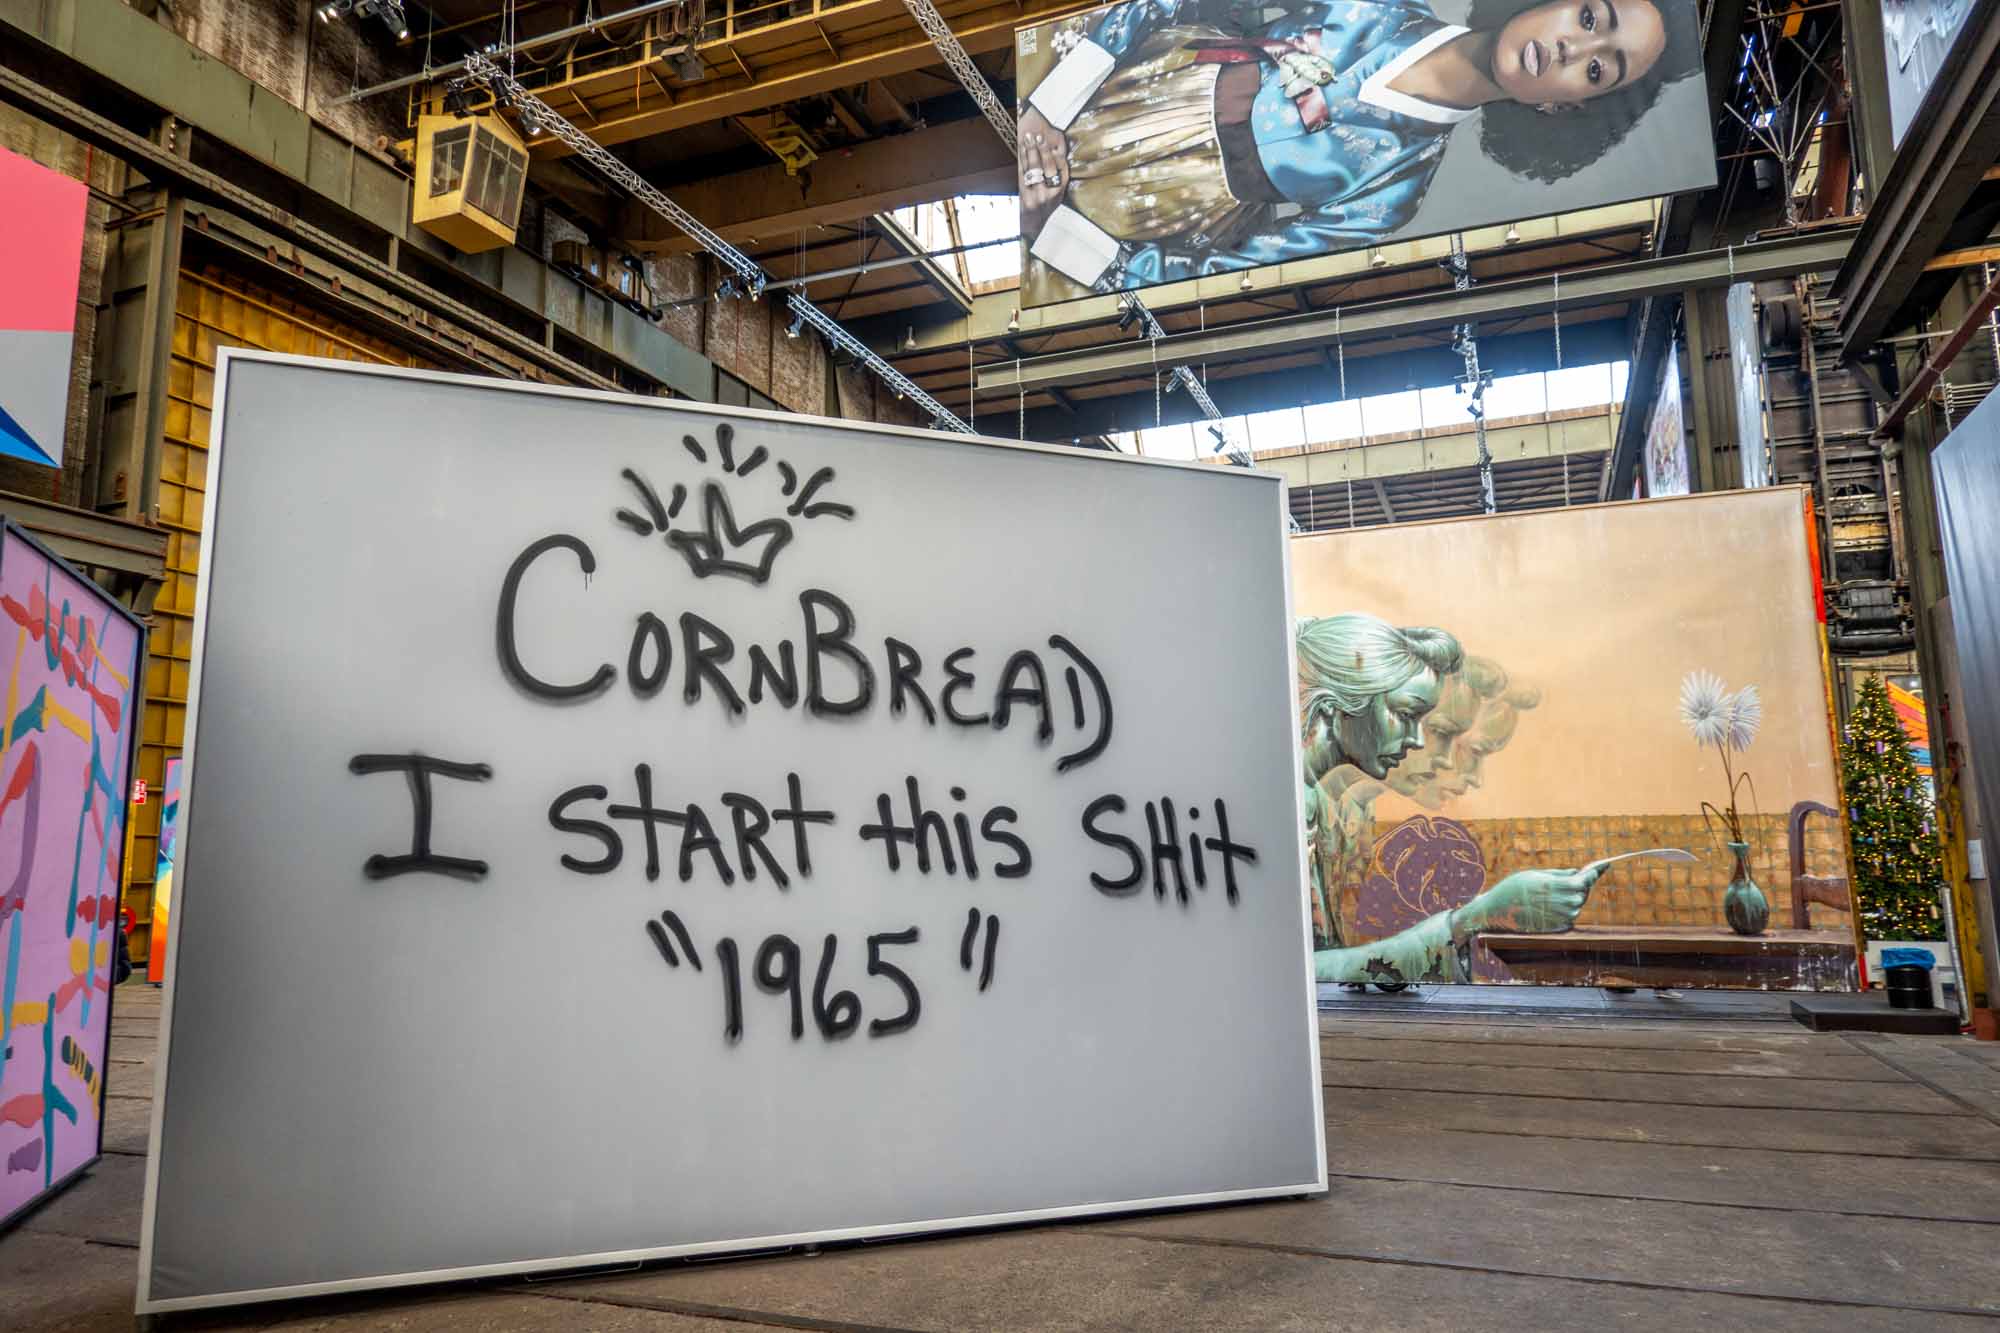 Large canvas that has a crown spray painted with the words: CornBread I Start this Shit "1965"